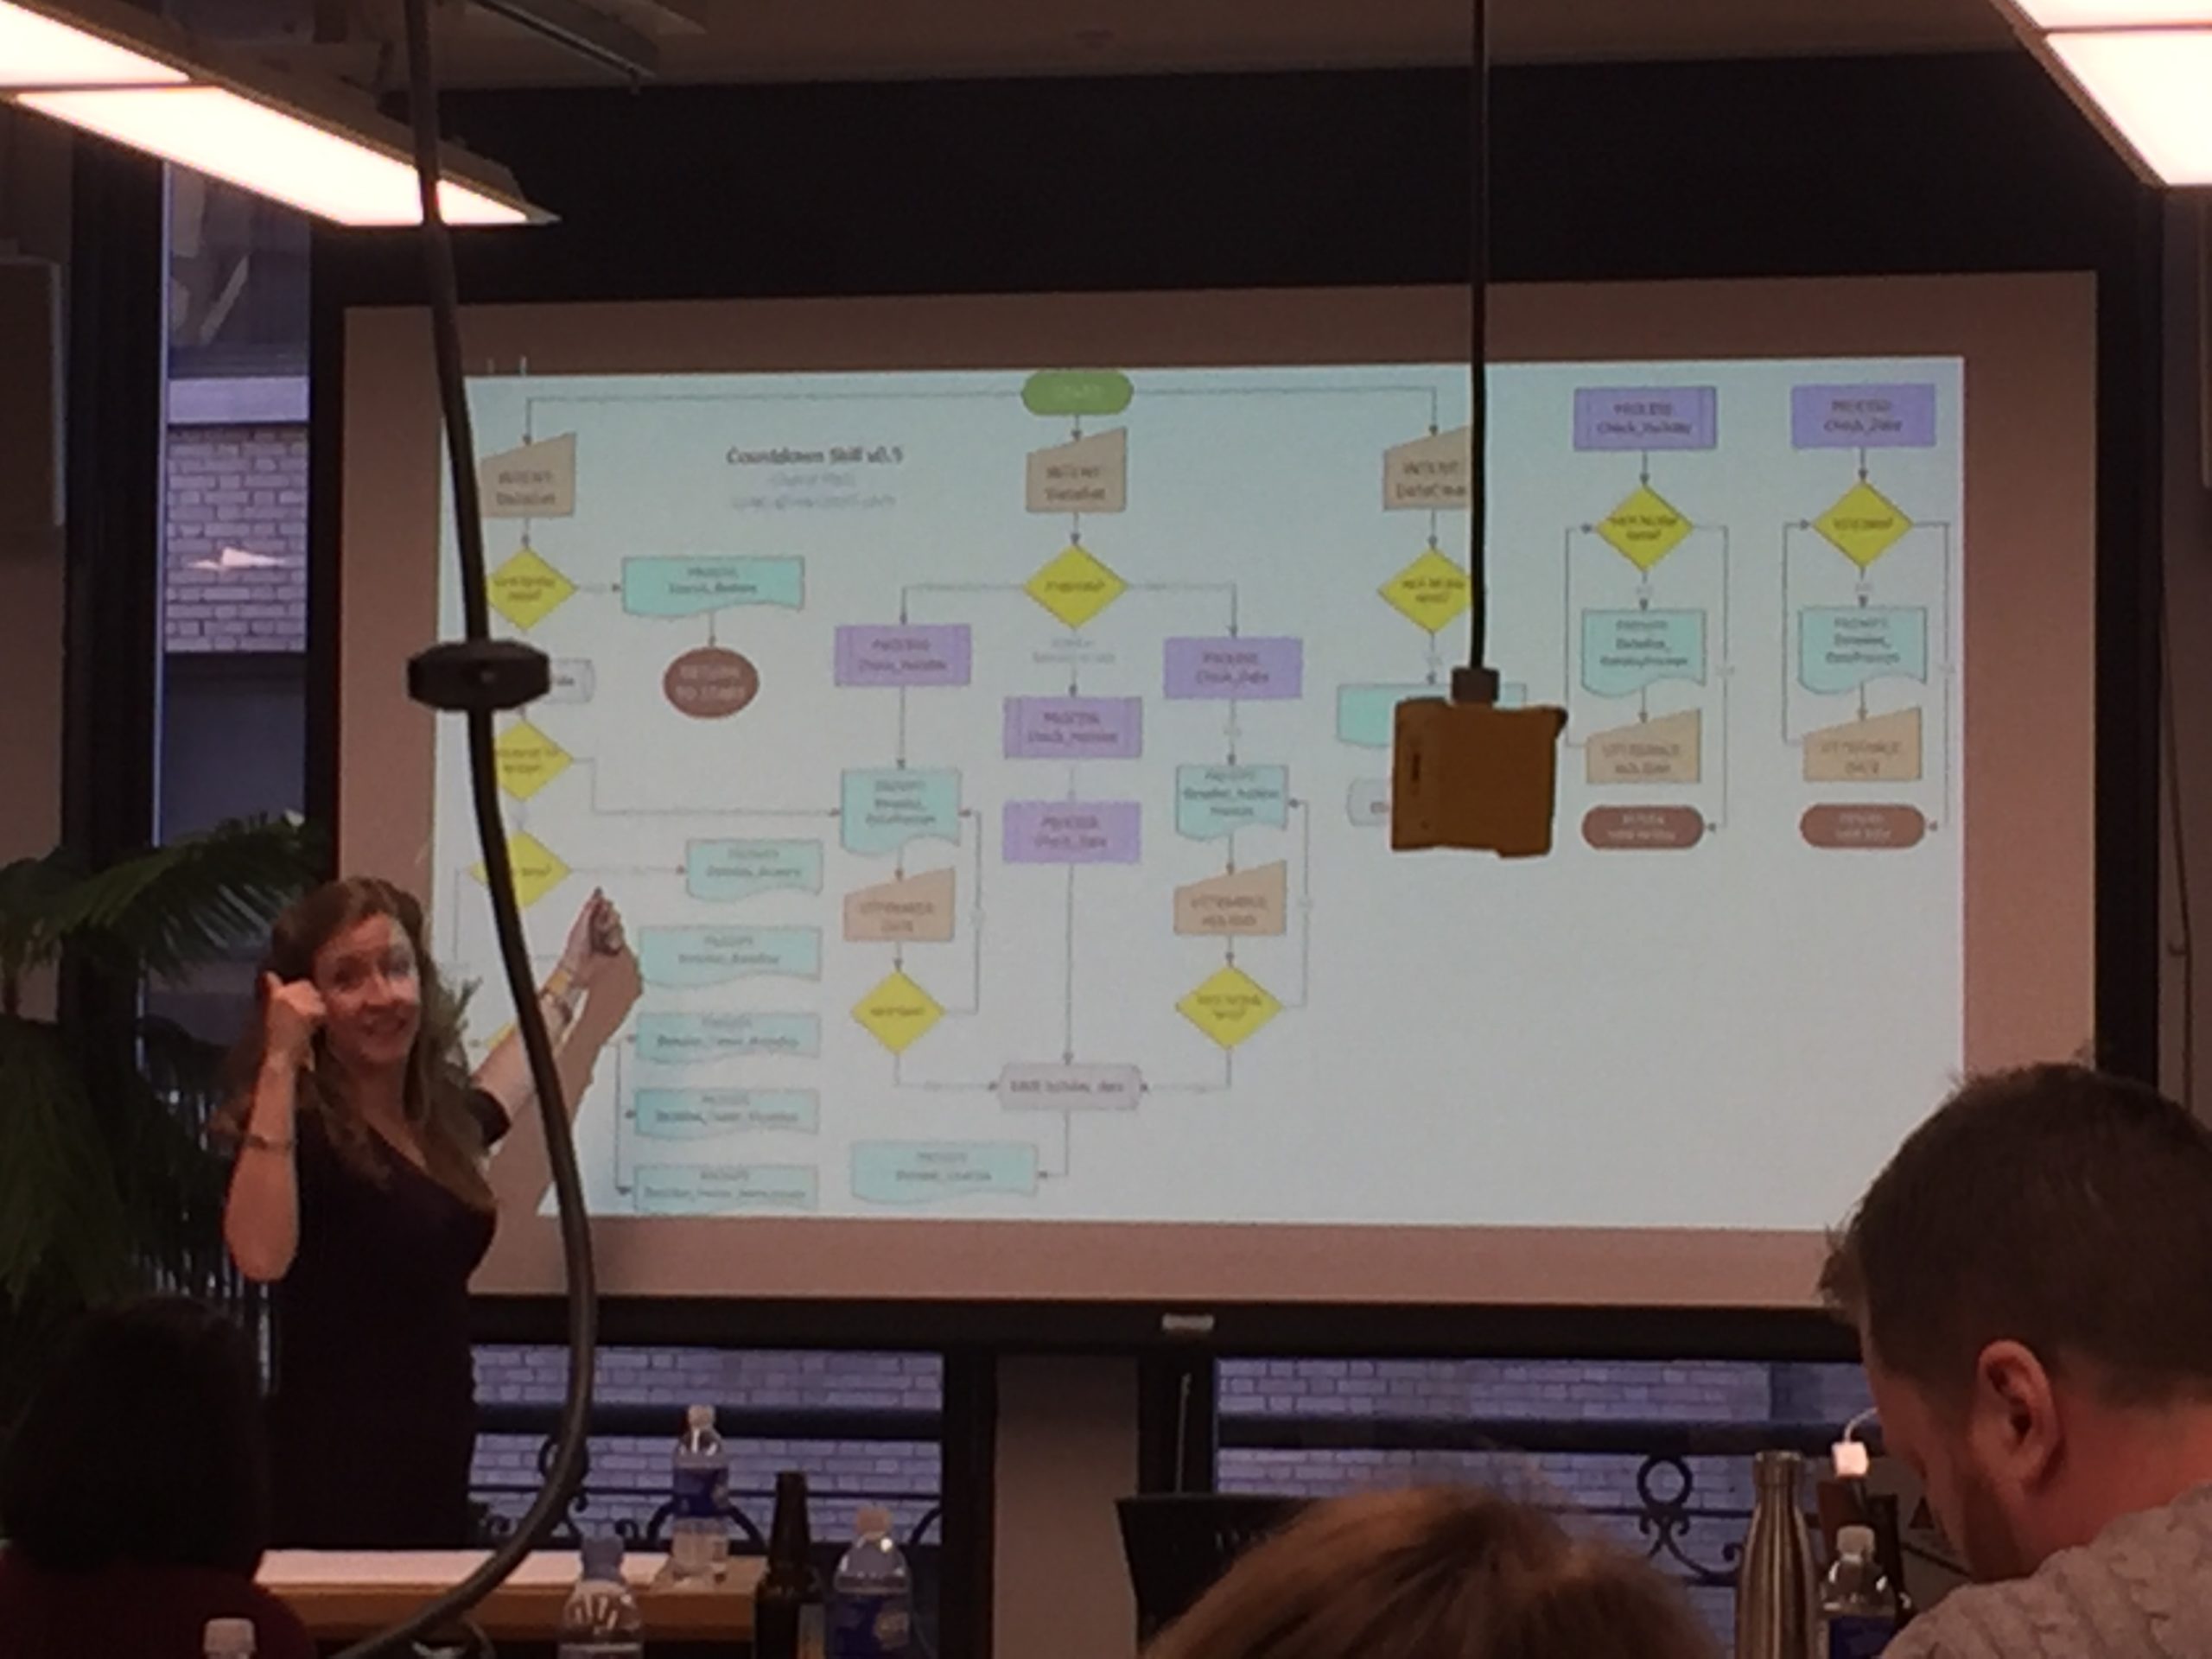 Cheryl Platz in a purple dress gesturing to a state in a voice design flow diagram projected in front of a workshop class.